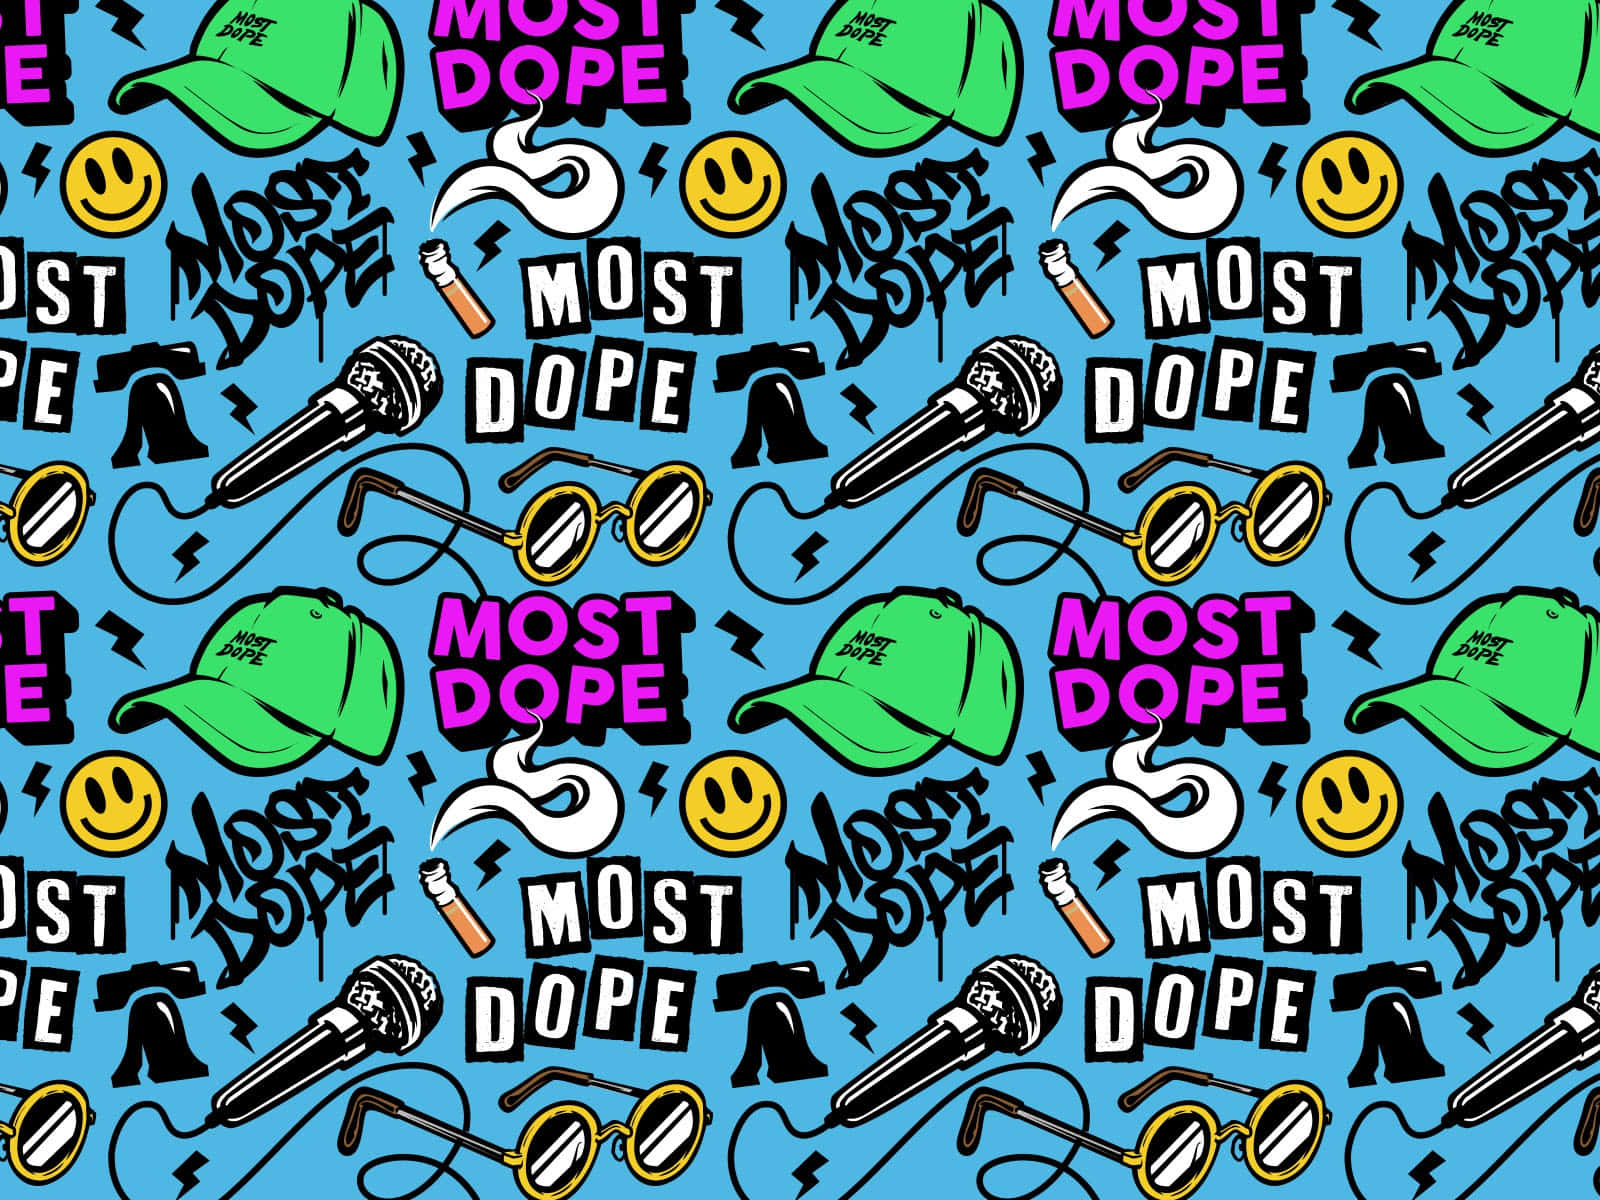 Stay Fresh and Most Dope Wallpaper